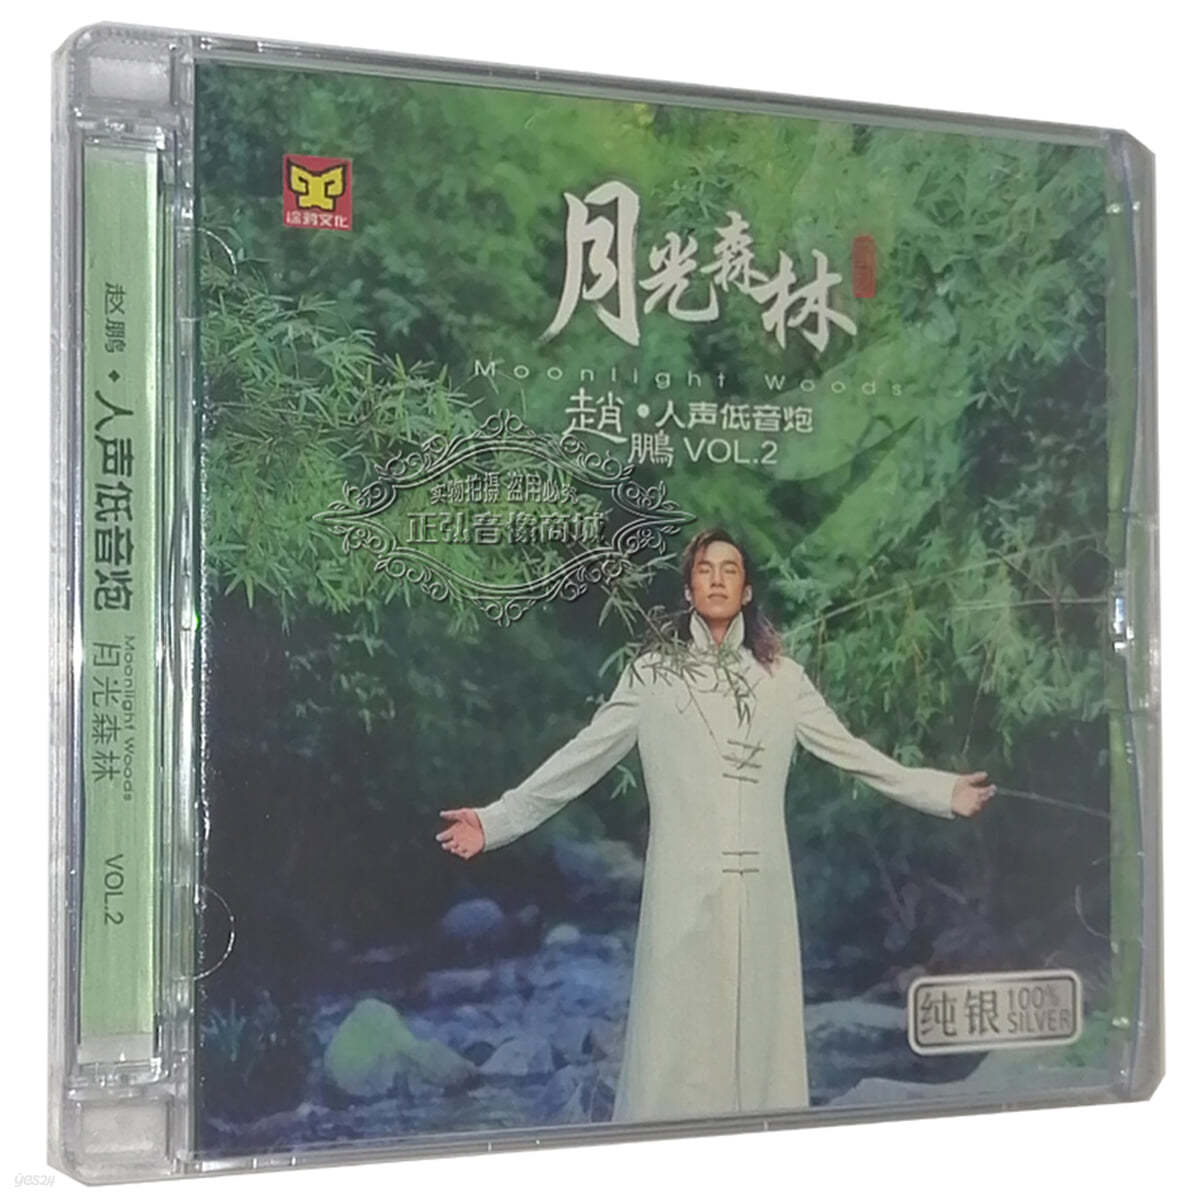 Zhao Peng (조붕) - The Greatest Basso Vol.2 : Moonlight Woods 